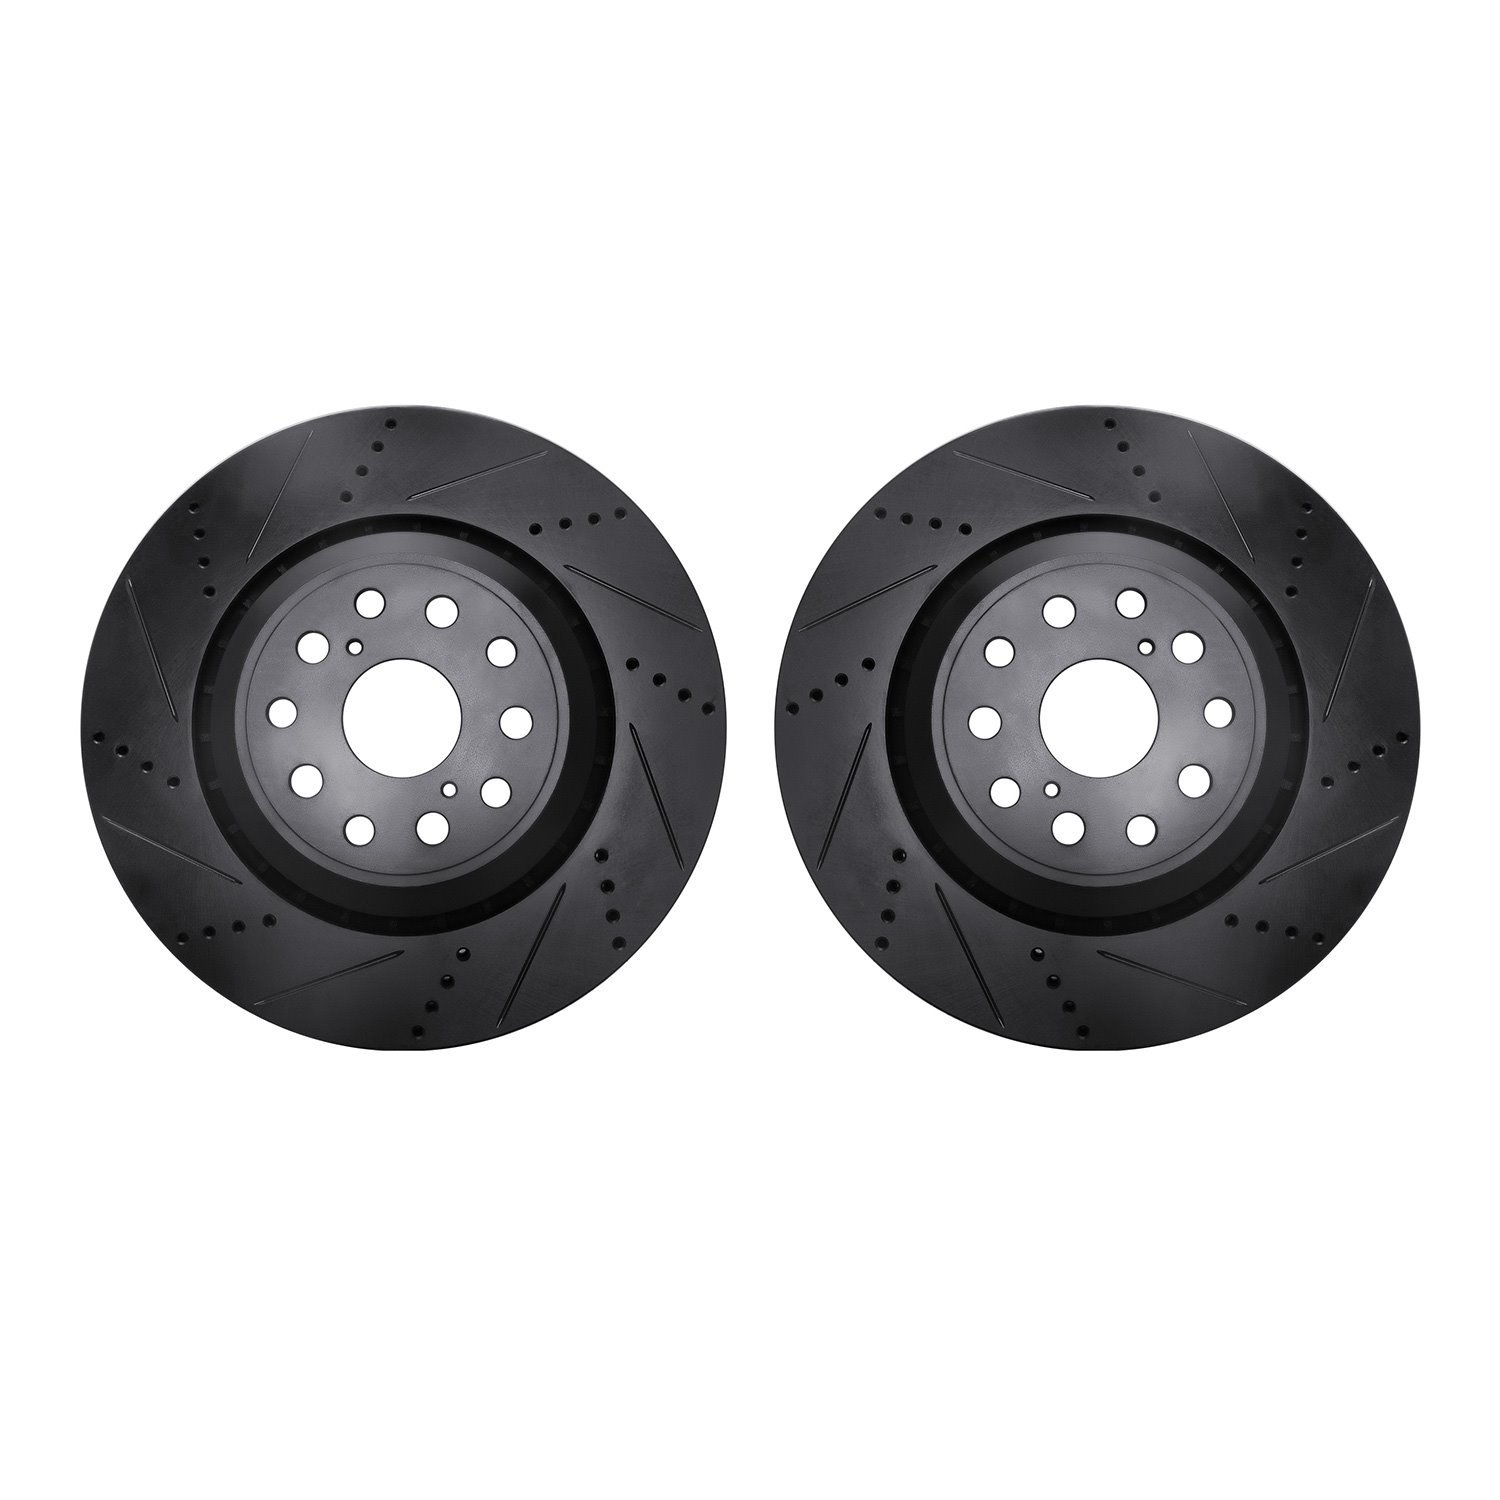 8002-75015 Drilled/Slotted Brake Rotors [Black], Fits Select Lexus/Toyota/Scion, Position: Front